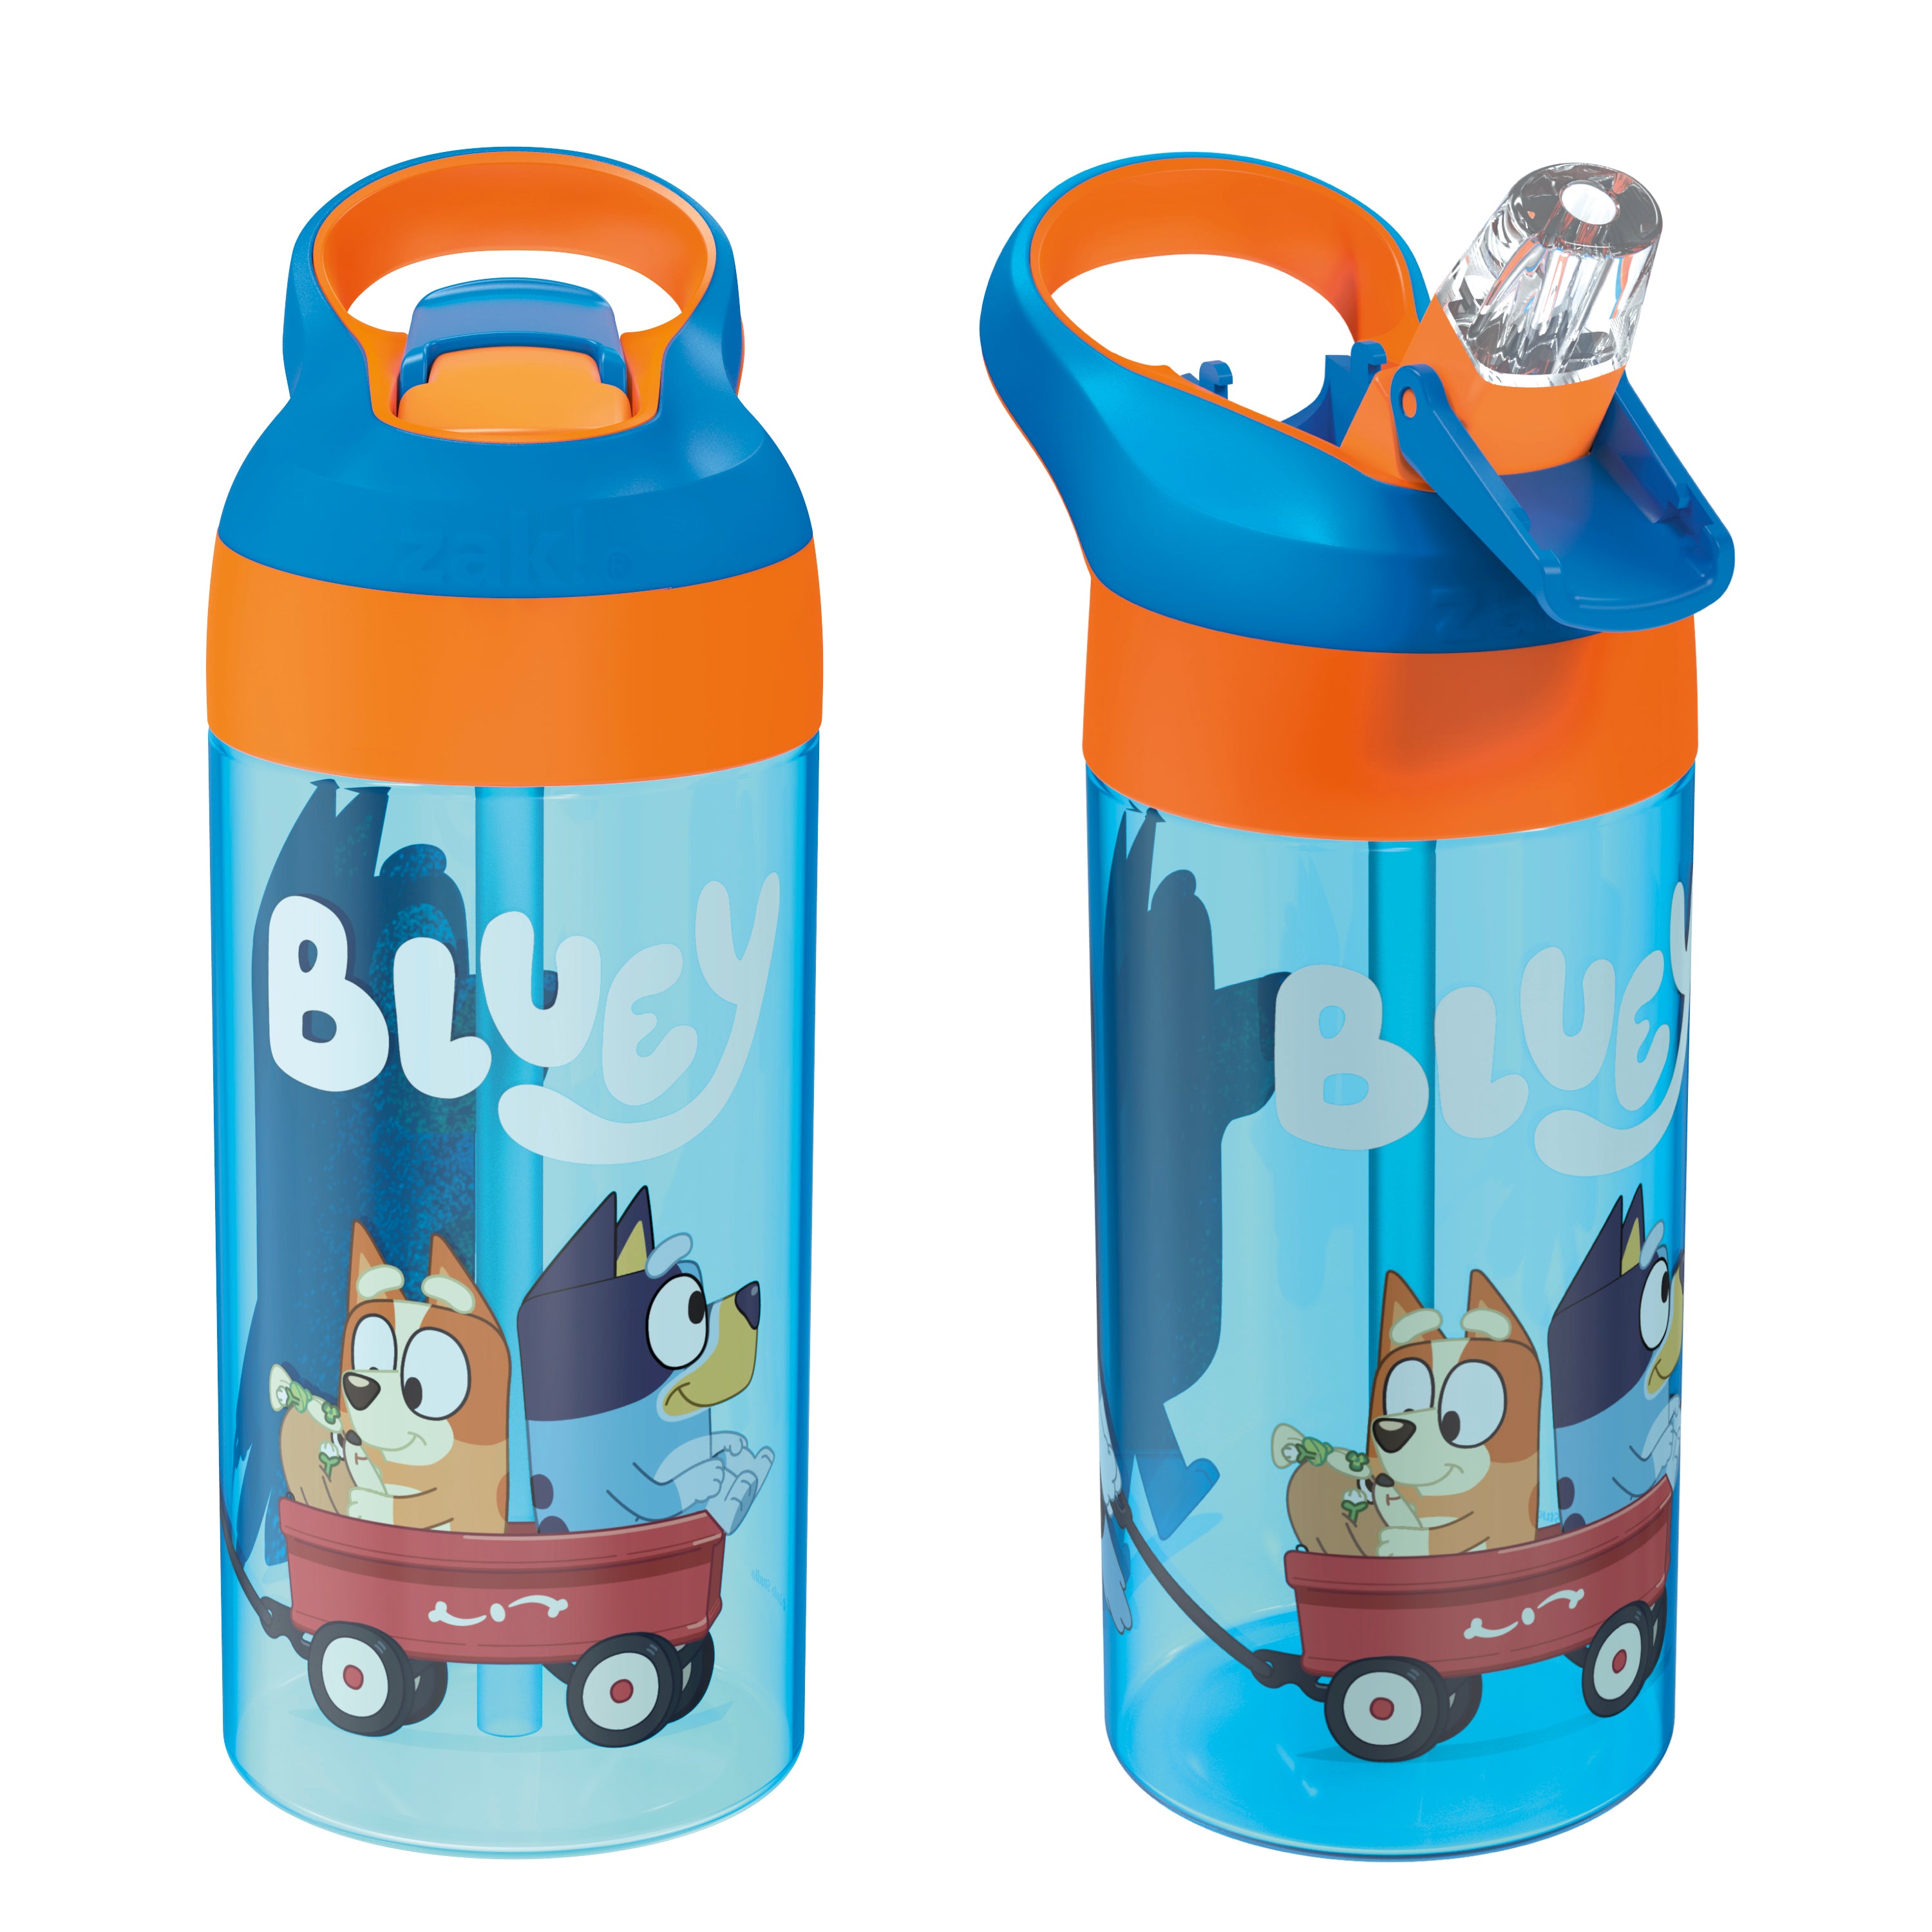 ZAK Bluey Bottle Cup & Lunch Sandwich Snack / Treat Food Container Kids  Blue NEW